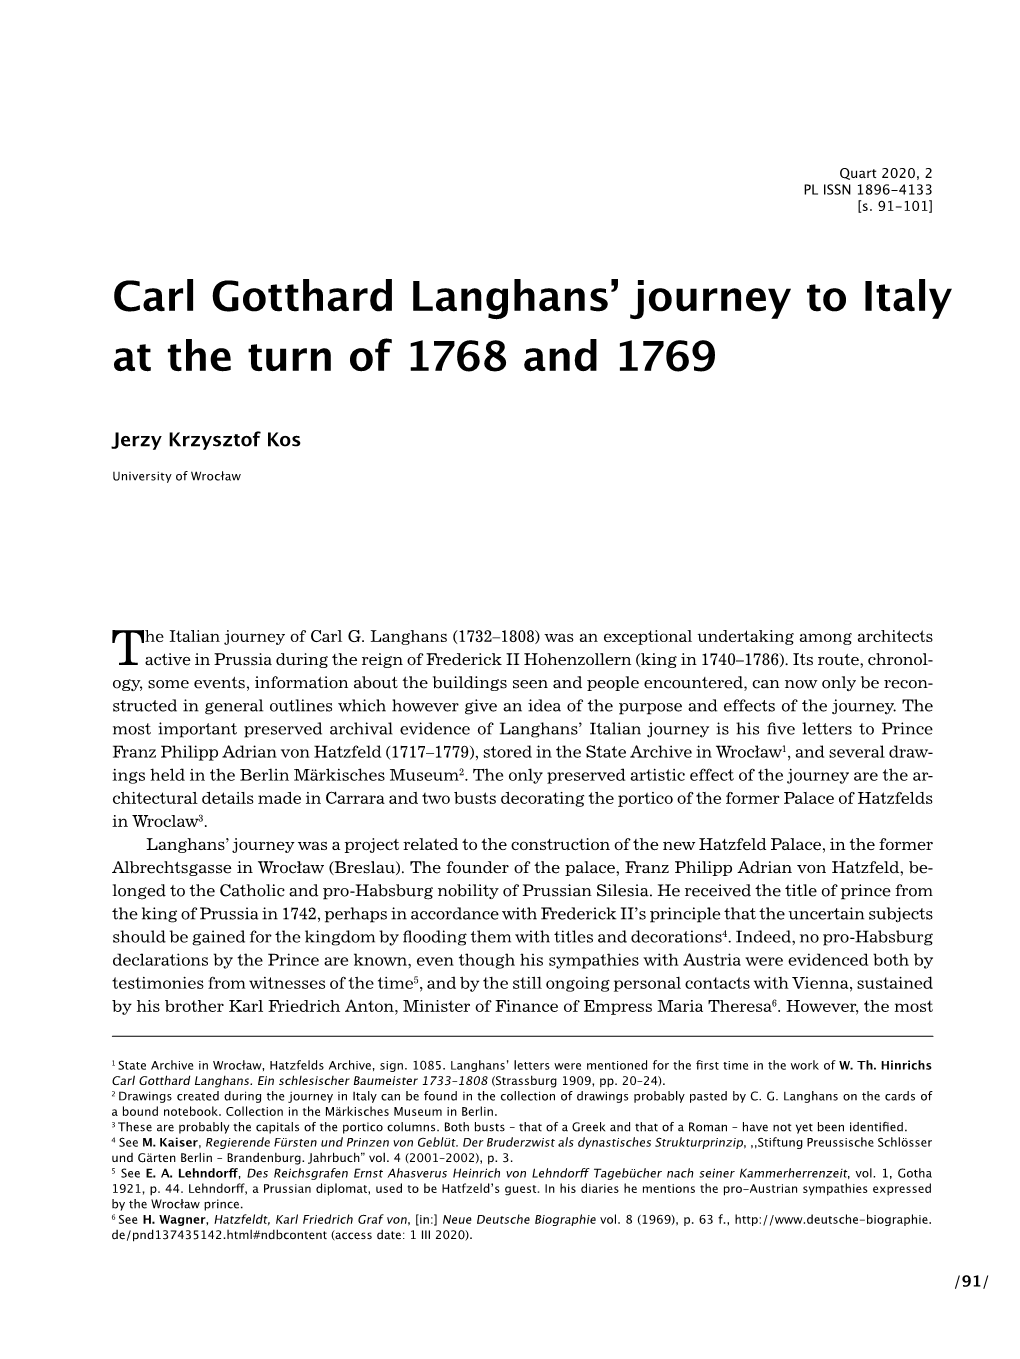 Carl Gotthard Langhans' Journey to Italy at the Turn of 1768 and 1769